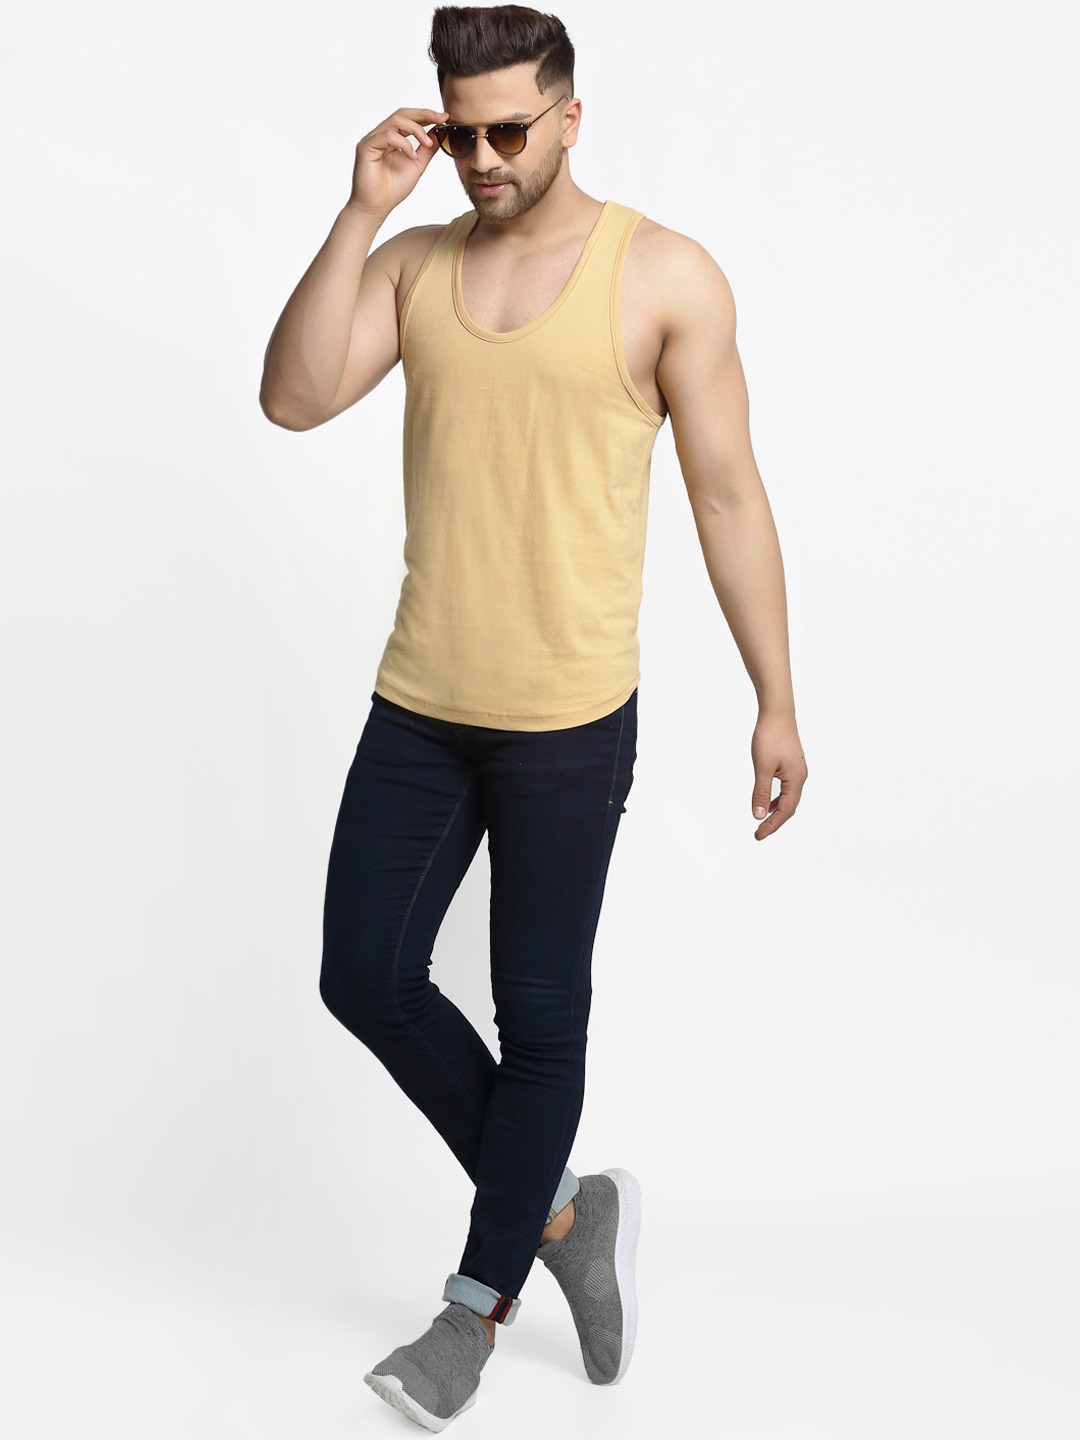 Clothing Innerwear Vests | Friskers Men Pack Of 2 Solid Pure Cotton Casual Gym Vests - VI07286